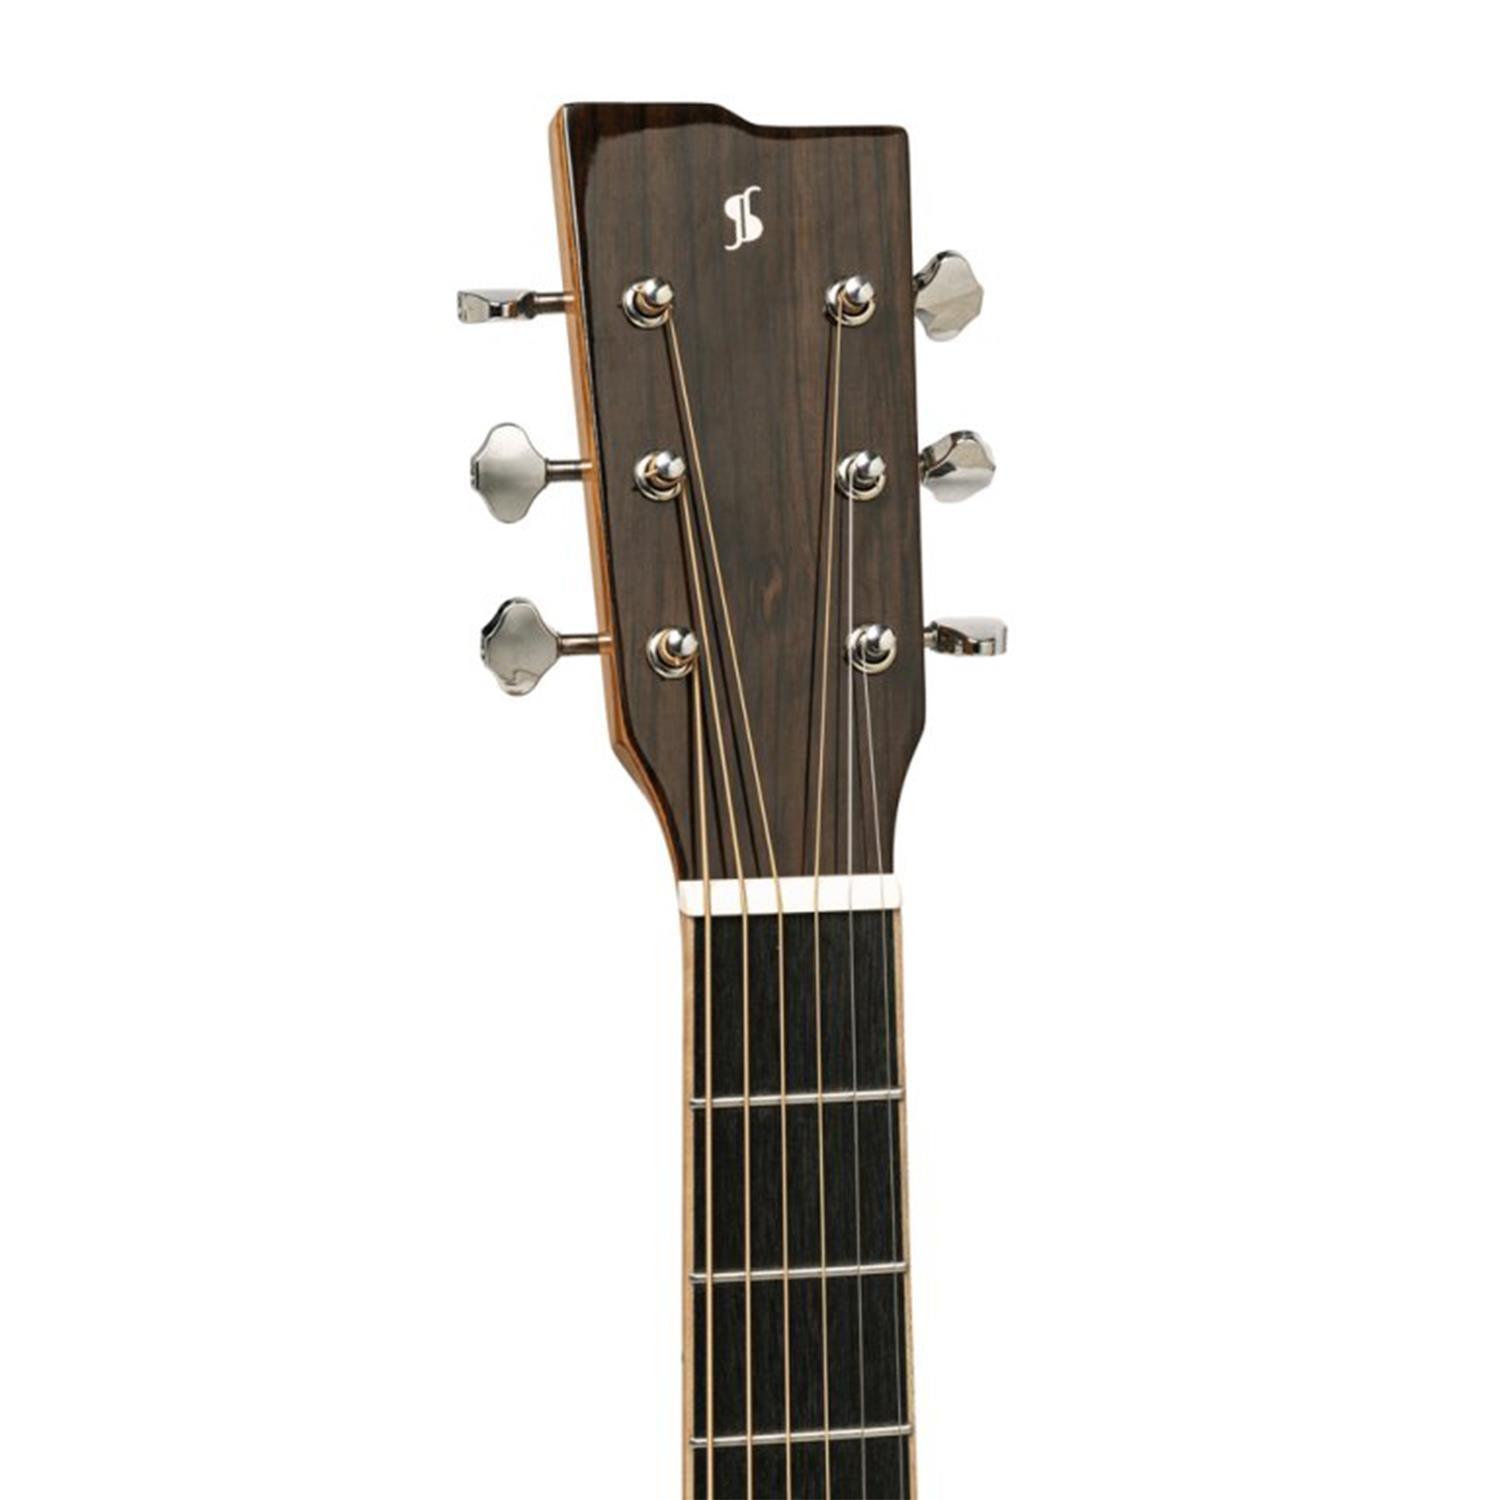 Stagg SA45 OCE-AC Series 45 Natural Orchestral Cutaway Acoustic-Electric Guitar - DY Pro Audio